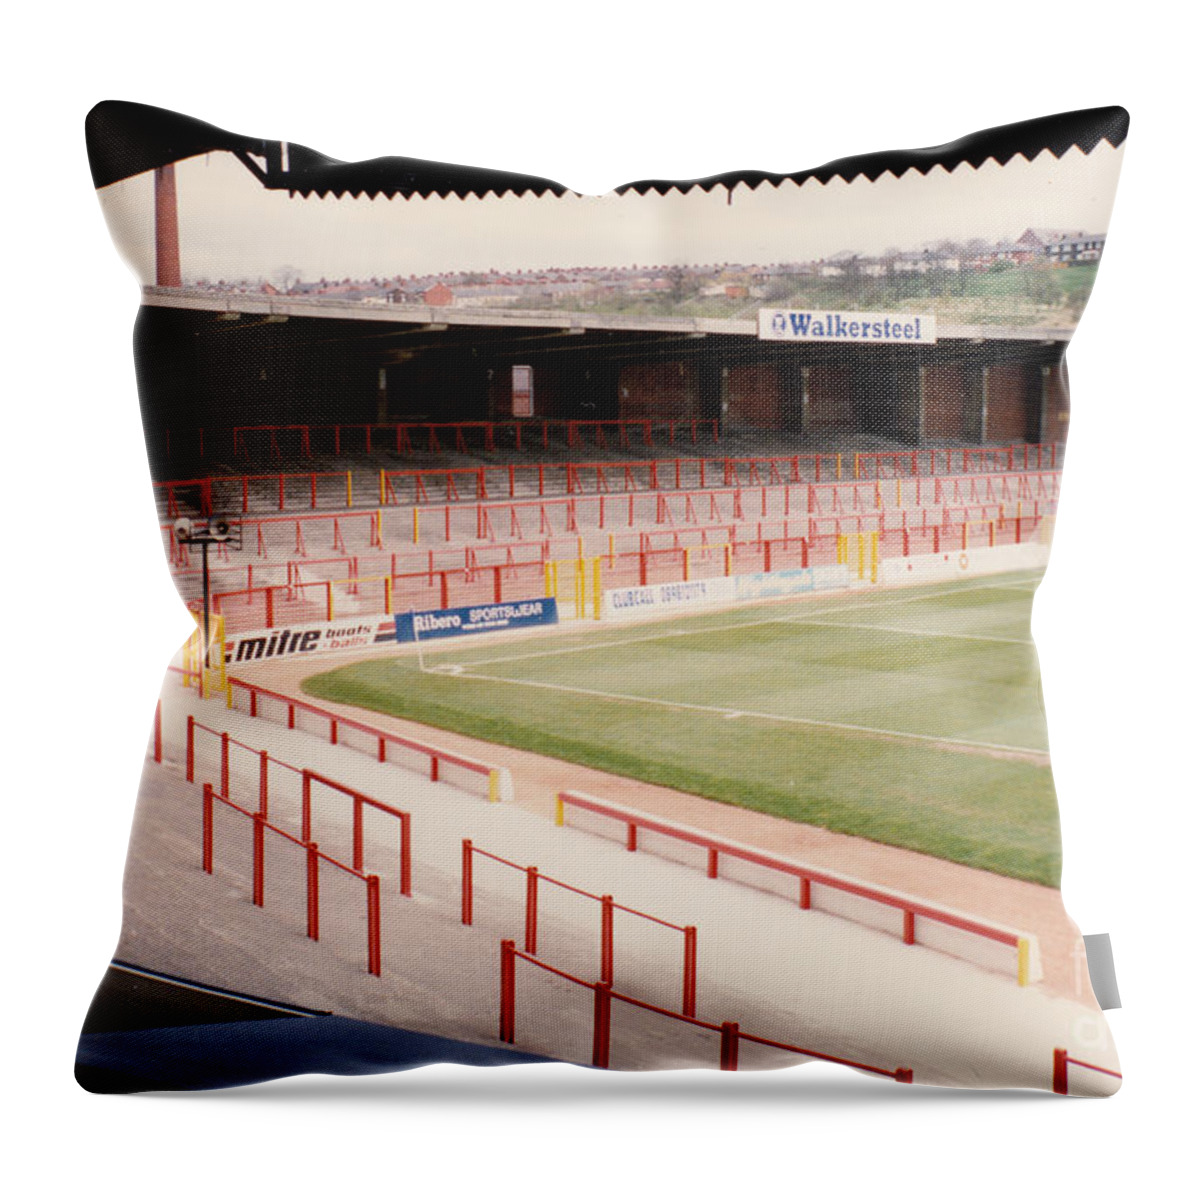 Blackburn Rovers Throw Pillow featuring the photograph Blackburn - Ewood Park - North Stand Town End 1 - April 1991 by Legendary Football Grounds